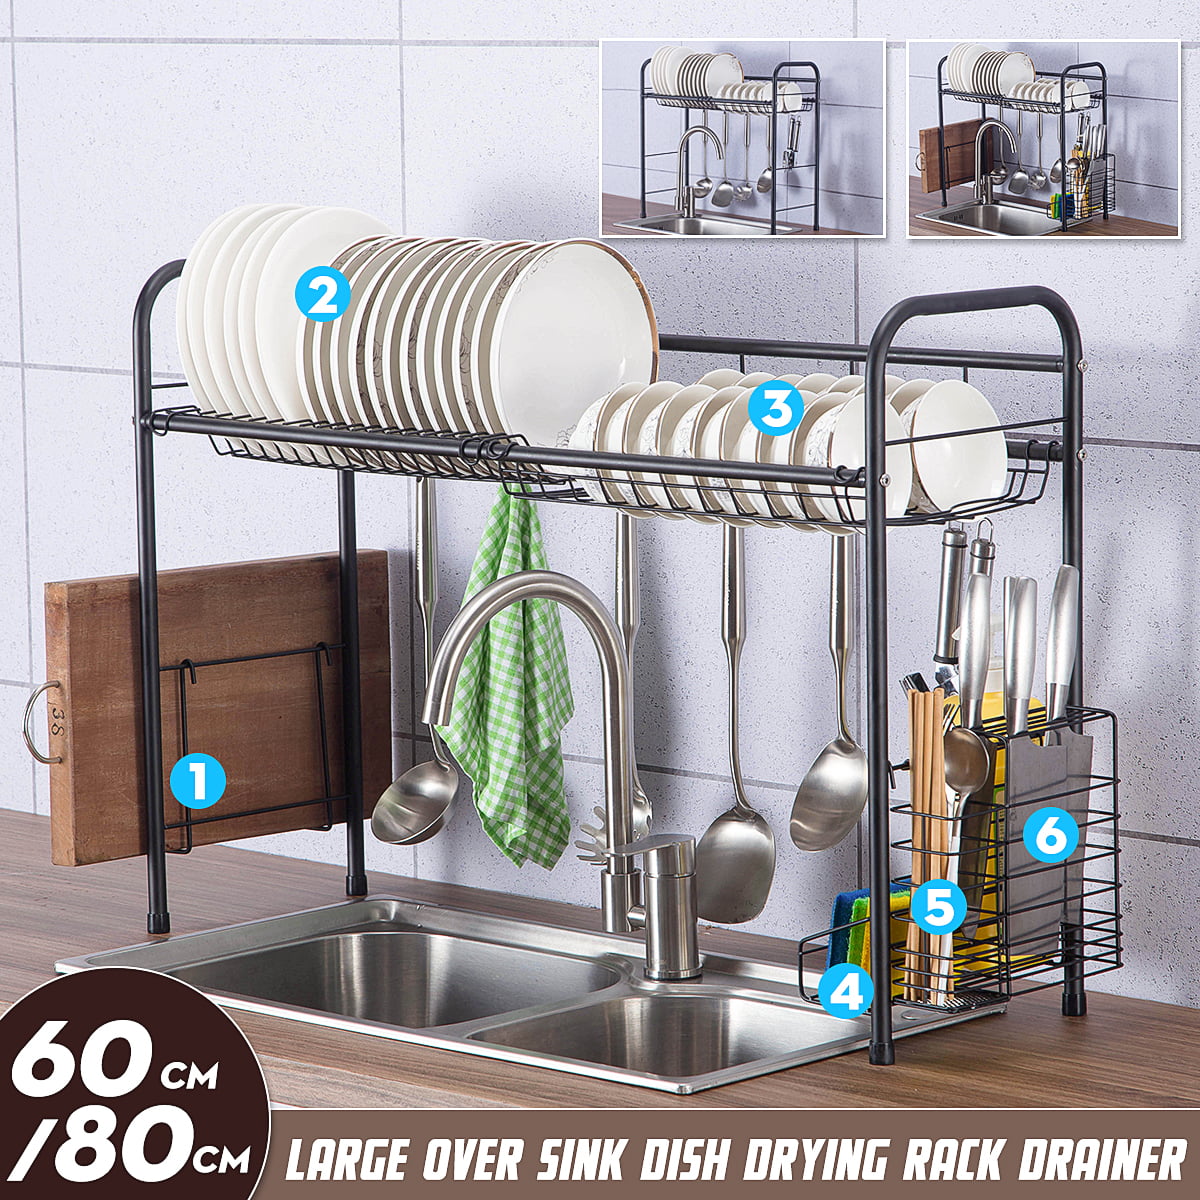 Over The Sink Dish Drying Rack Stainless Steel Kitchen Cutlery Holder Shelf